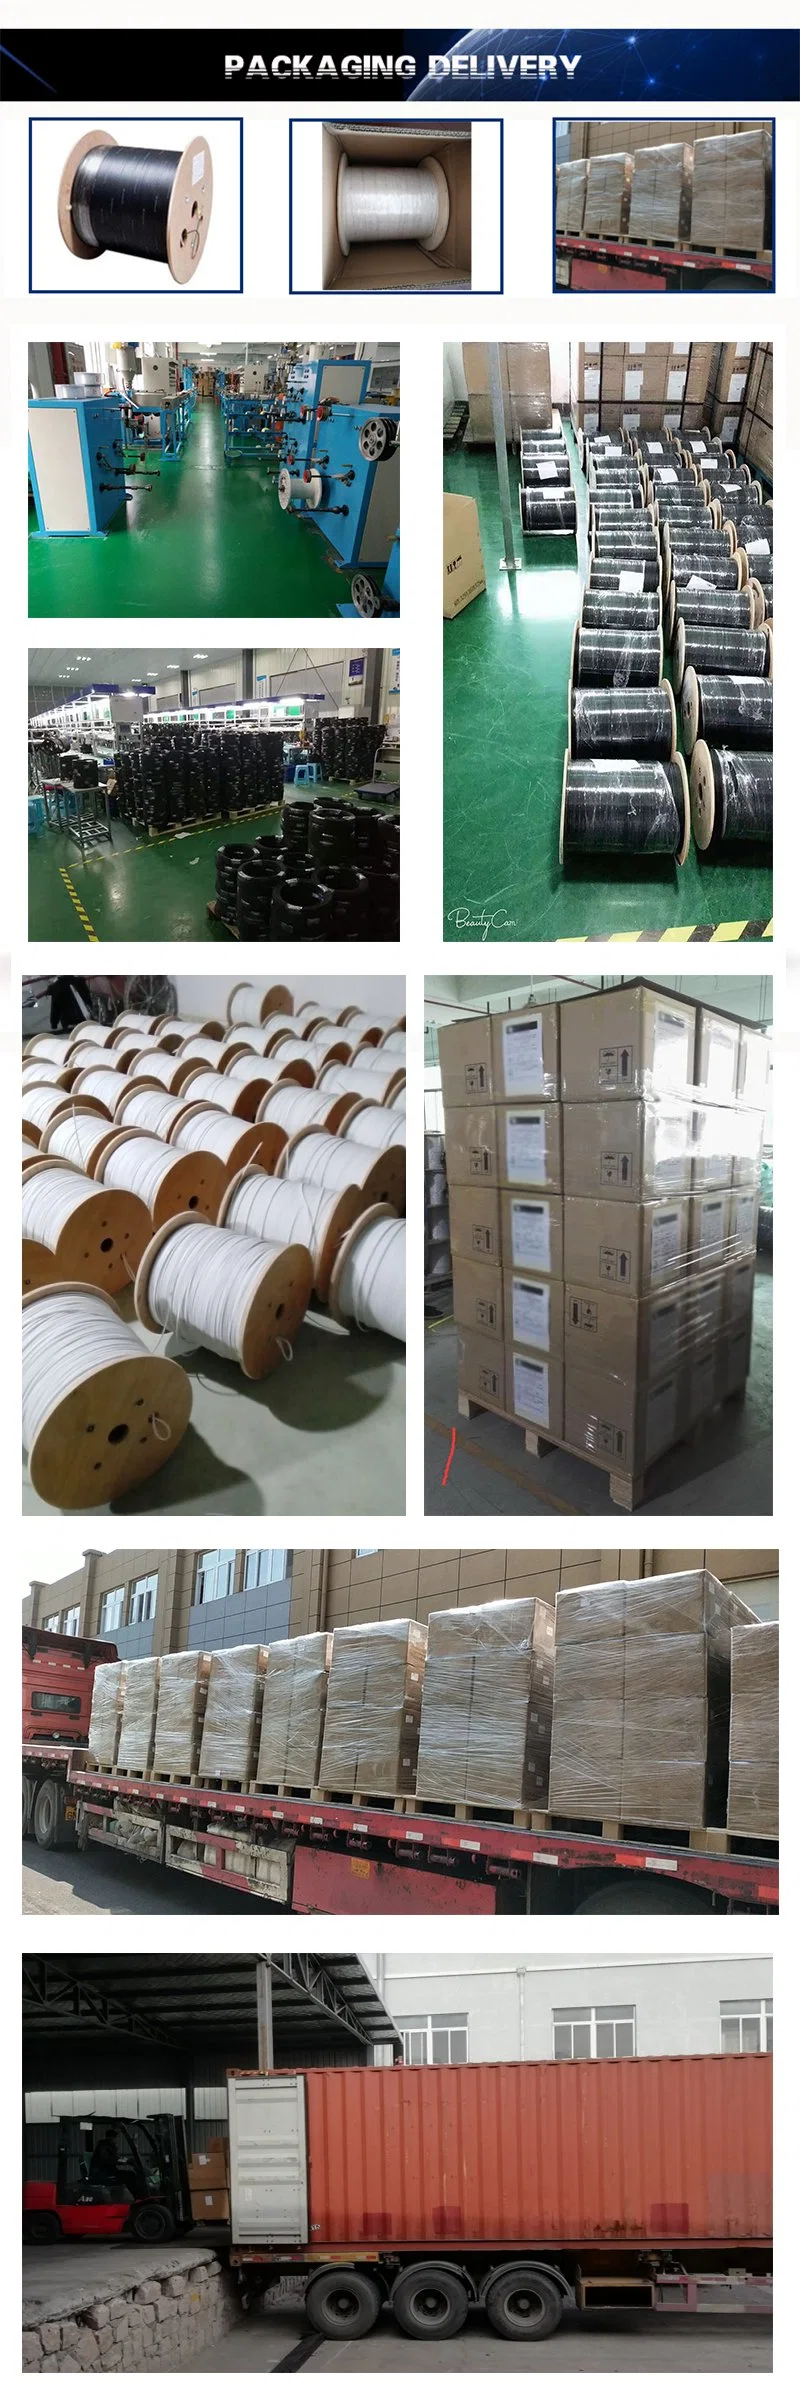 Factory Price Outdoor/Indoor 1/2/4/8/12 Cores Self-Support LSZH Singlemode G652D/G657A FRP/Kfrp Fiber Optic Flat FTTH Drop Cable